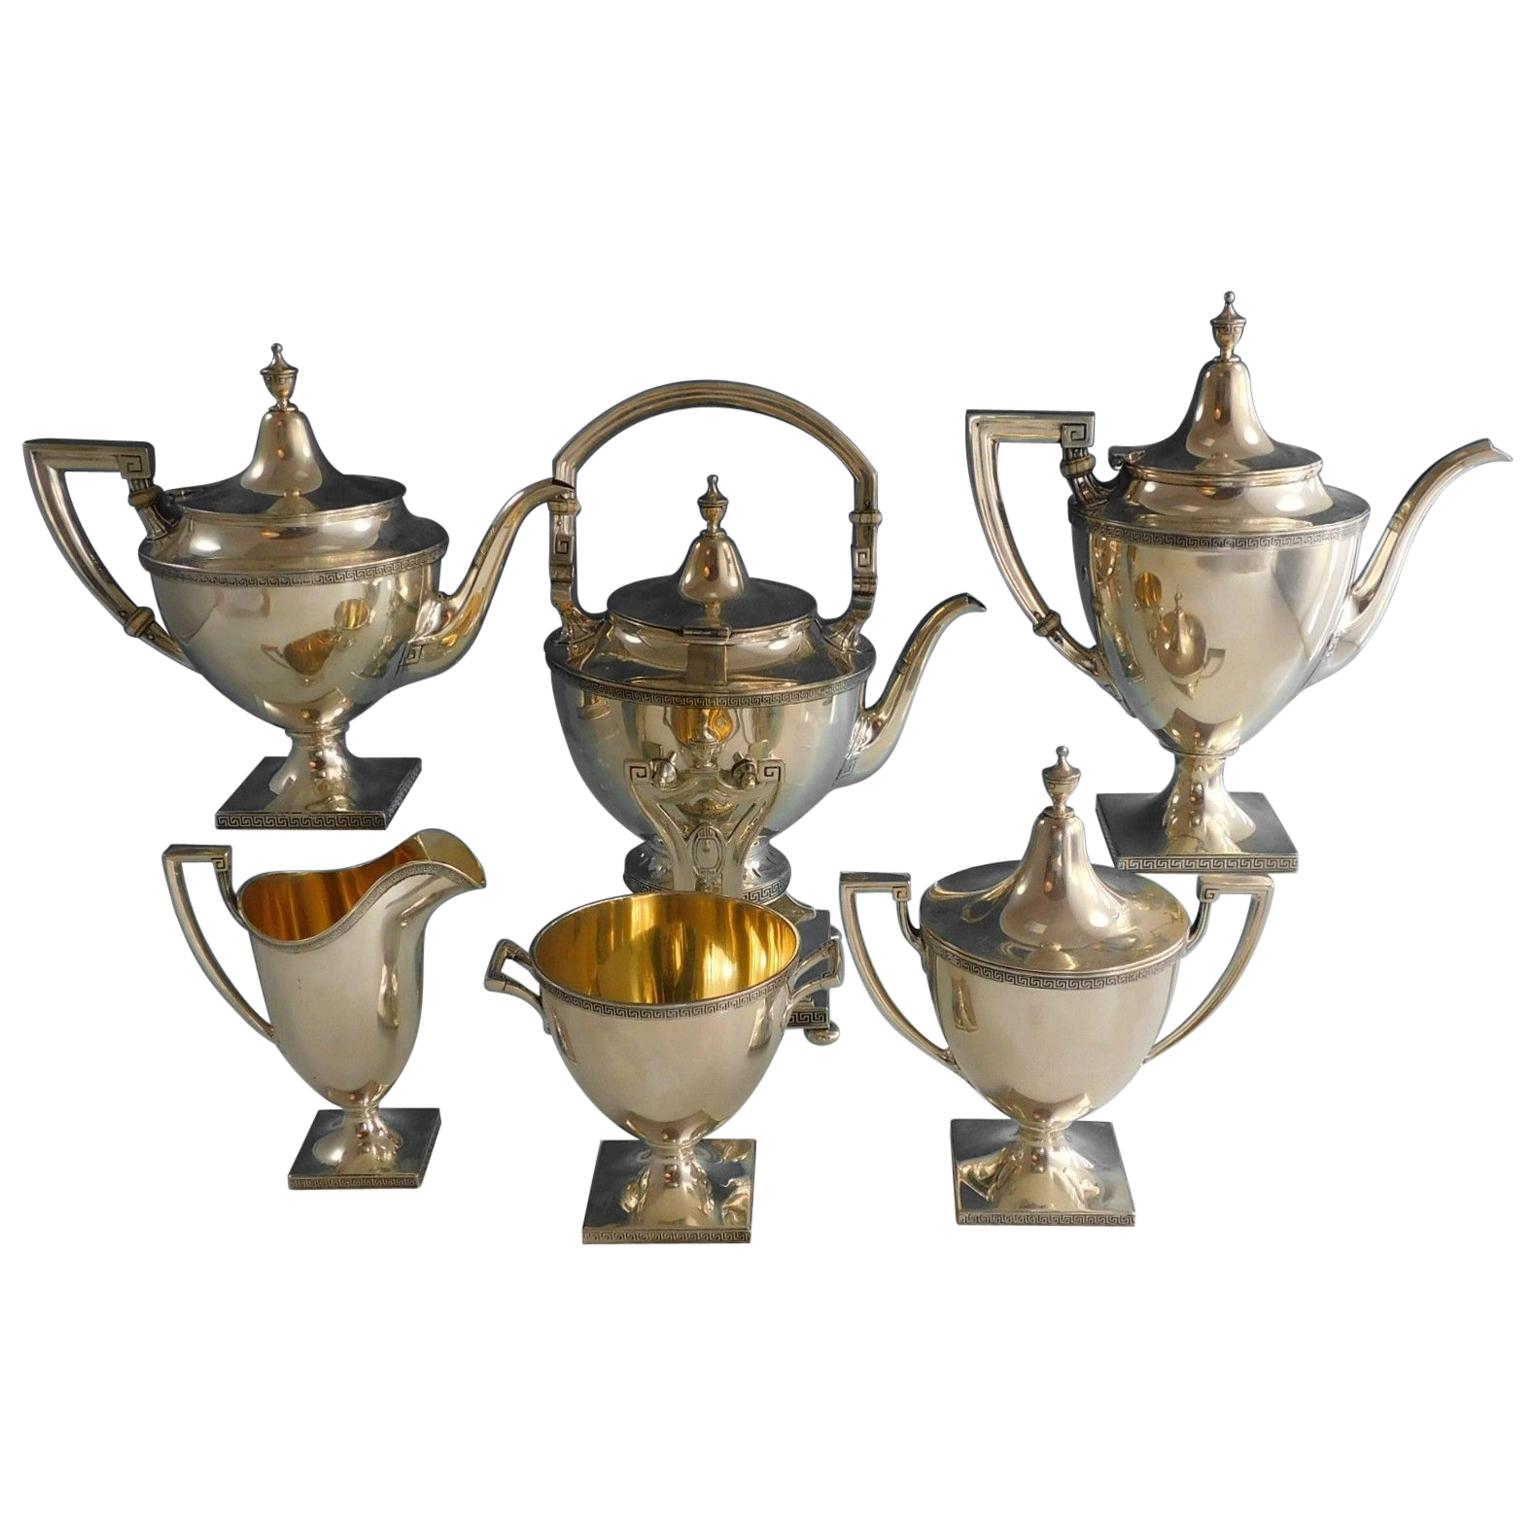 Etruscan by Gorham Sterling Silver 6-Piece Tea Set '#2186' Vintage with Kettle